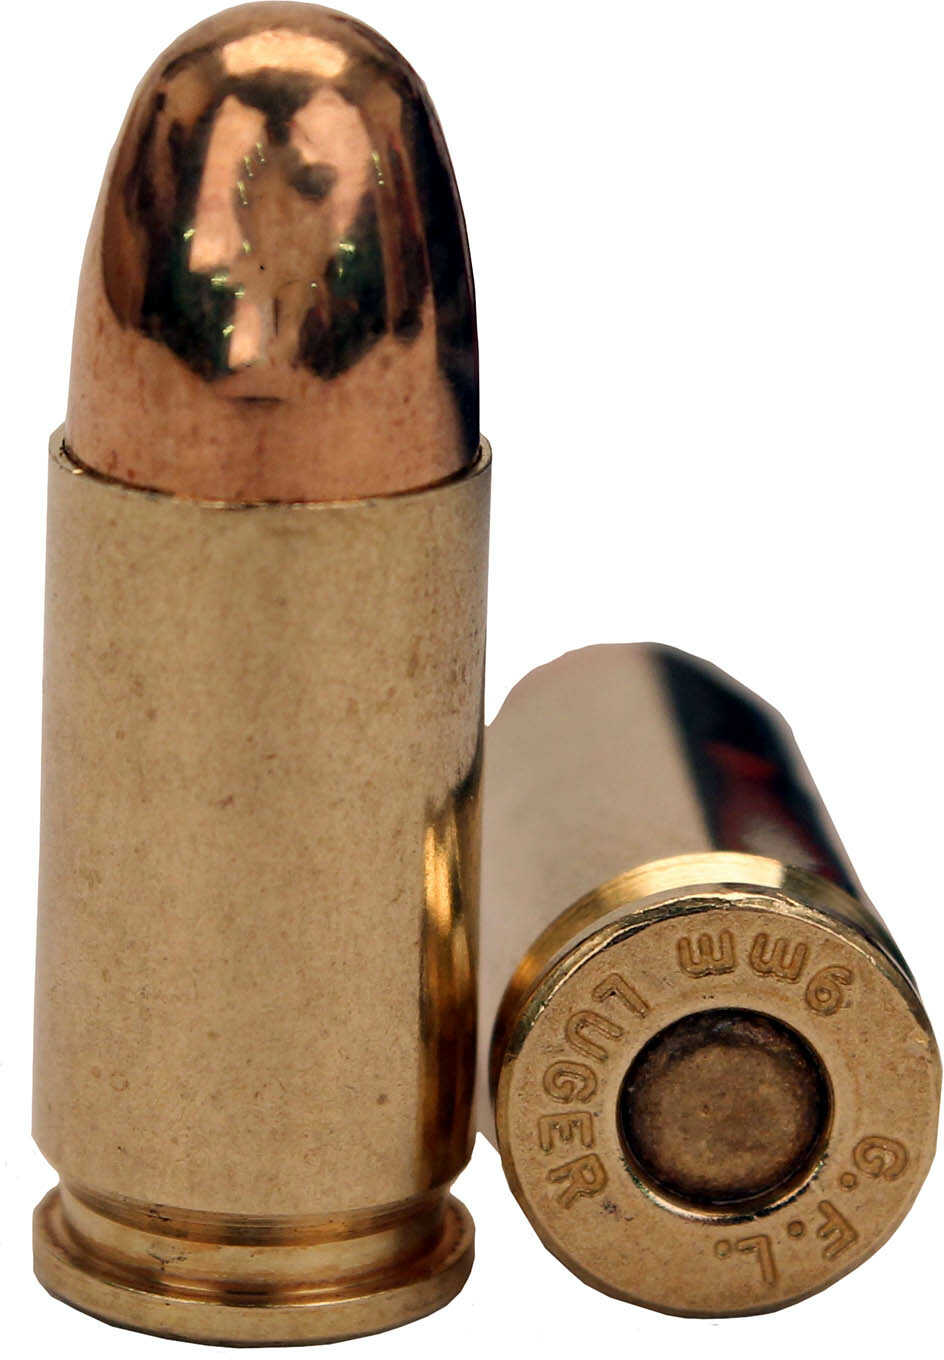 9mm Luger 50 Rounds Ammunition Fiocchi Ammo 158 Grain Full Metal Jacket